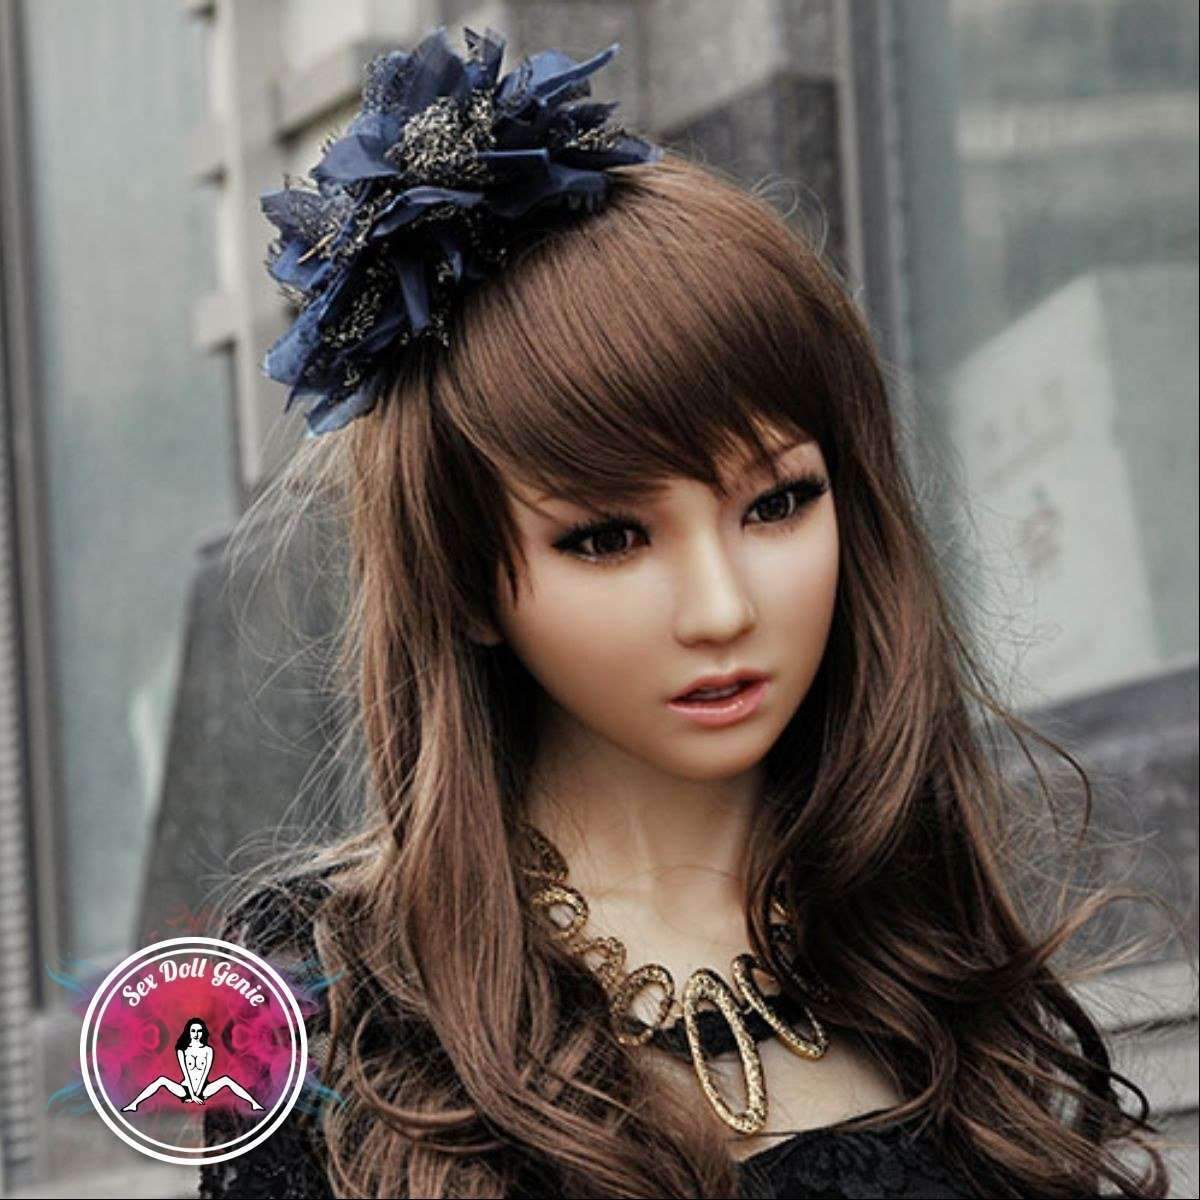 DS Doll - 163Plus - Thera Head - Type 1 D Cup Silicone Doll-7